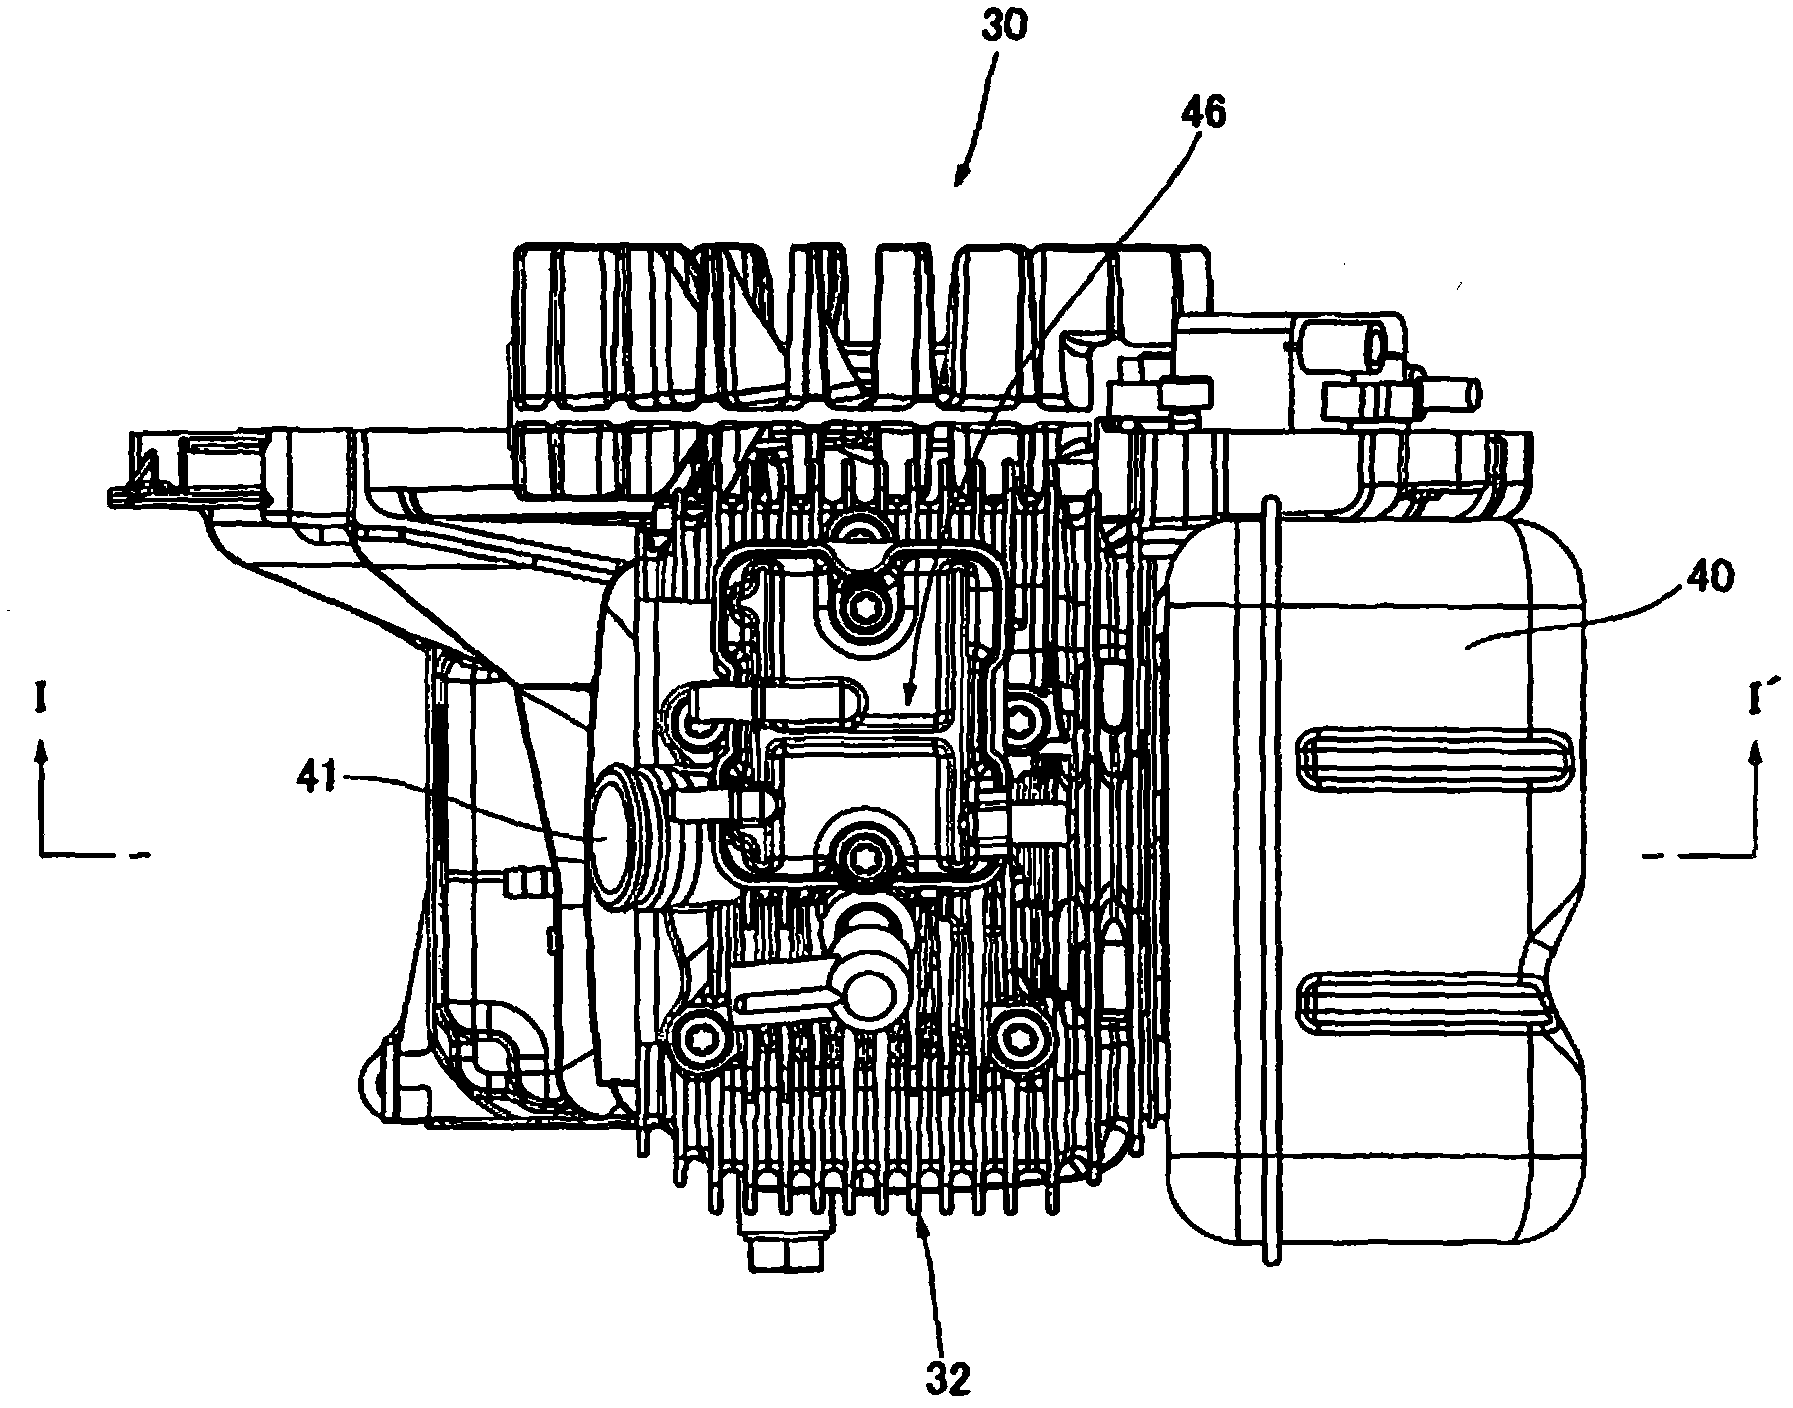 Lubrication structure for four-stroke engine